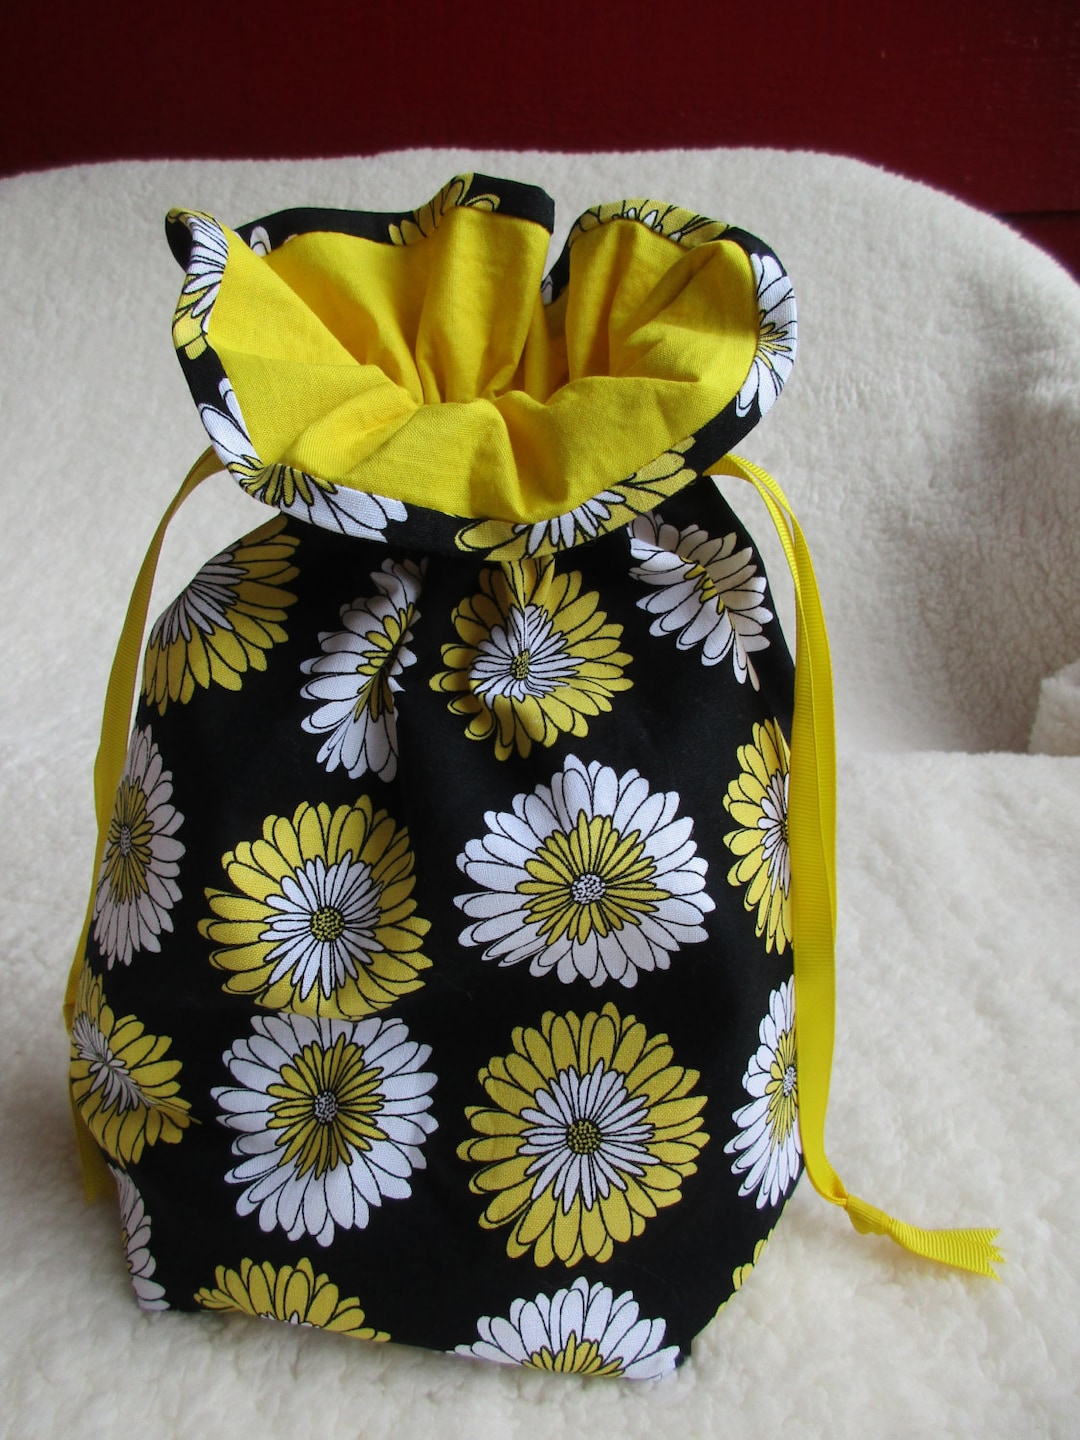 Handmade Drawstring Bag , Tote or Organizer for Carrying All Kinds of ...